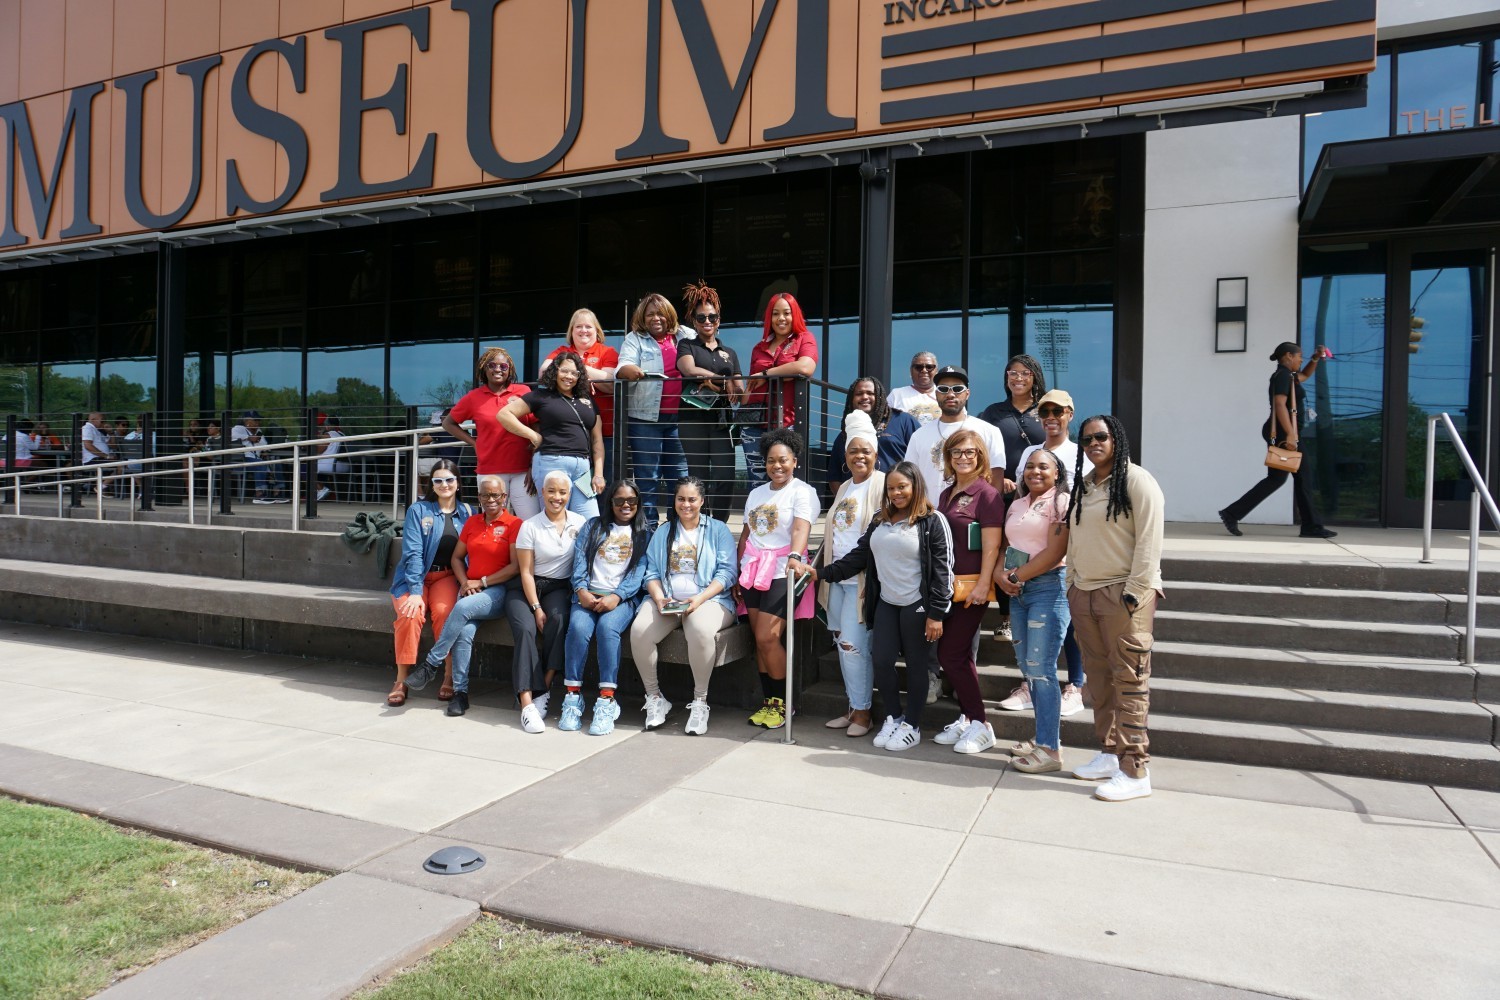 For our staff retreat, we went to the Legacy Museum, which gives a history of America’s history of racial injustice. 
